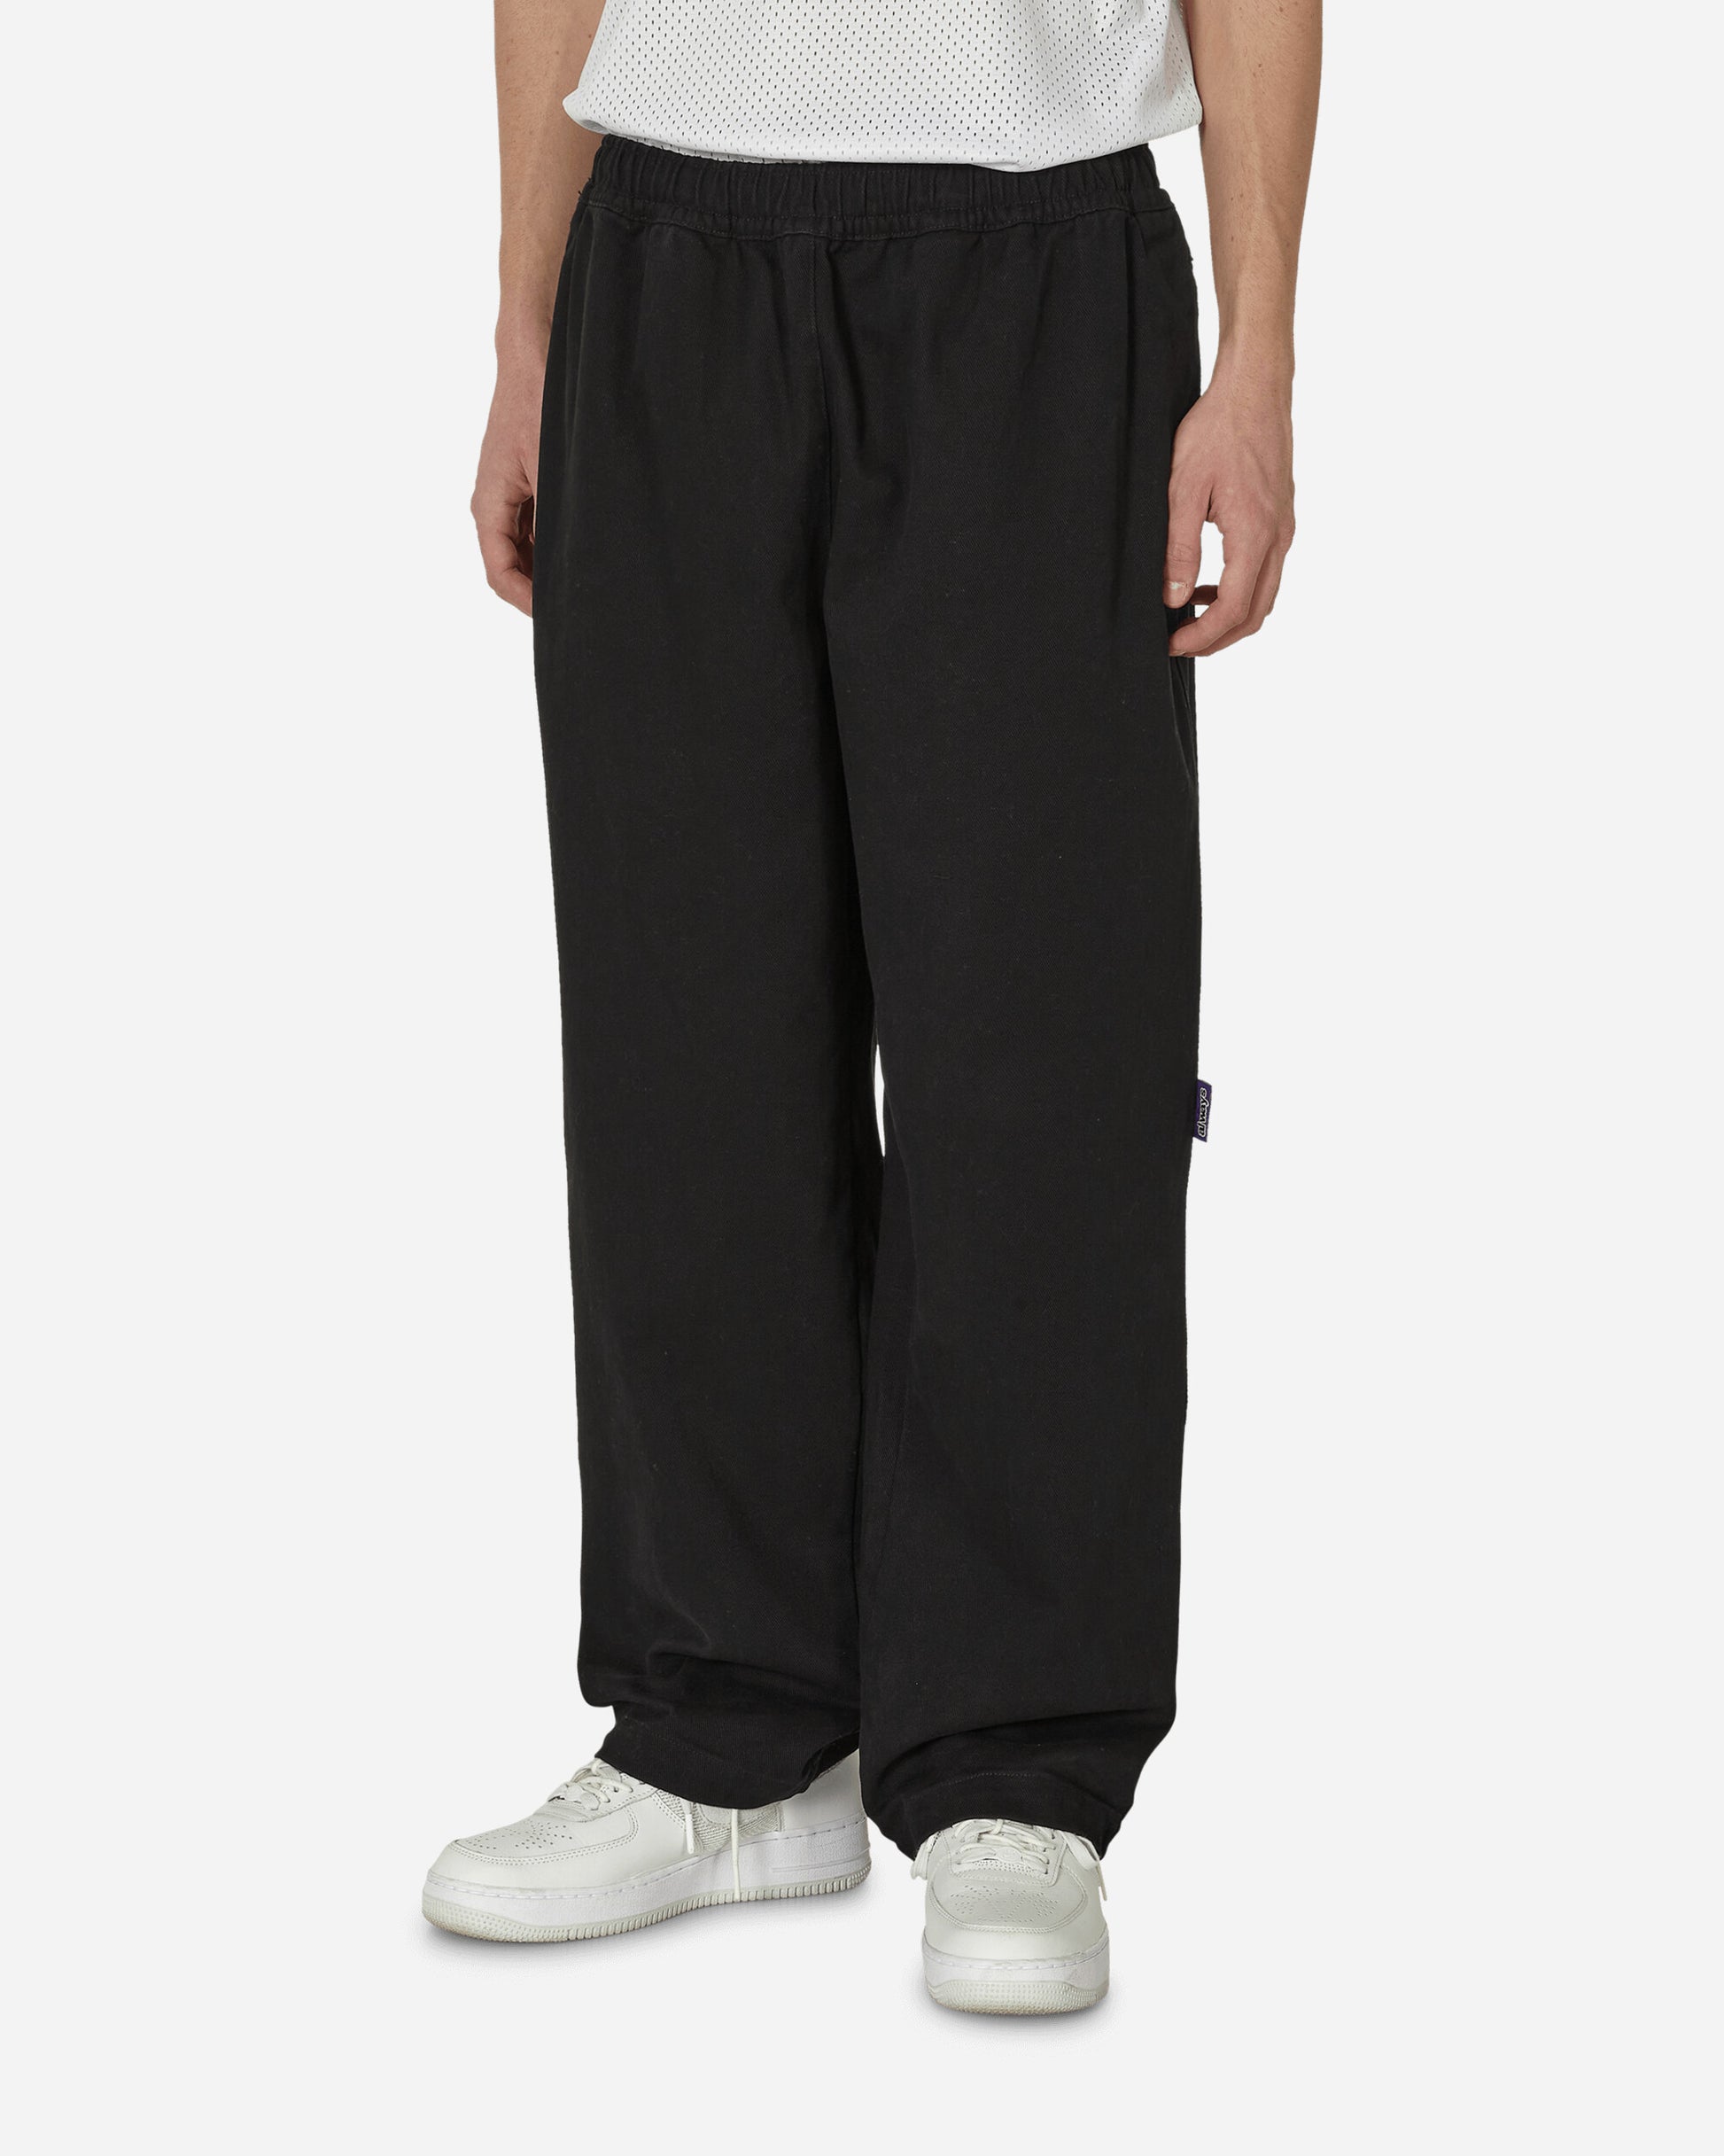 Always Do What You Should Do Relaxed Skate Pant Black Pants Chinos RELAXEDPANTS BLACK